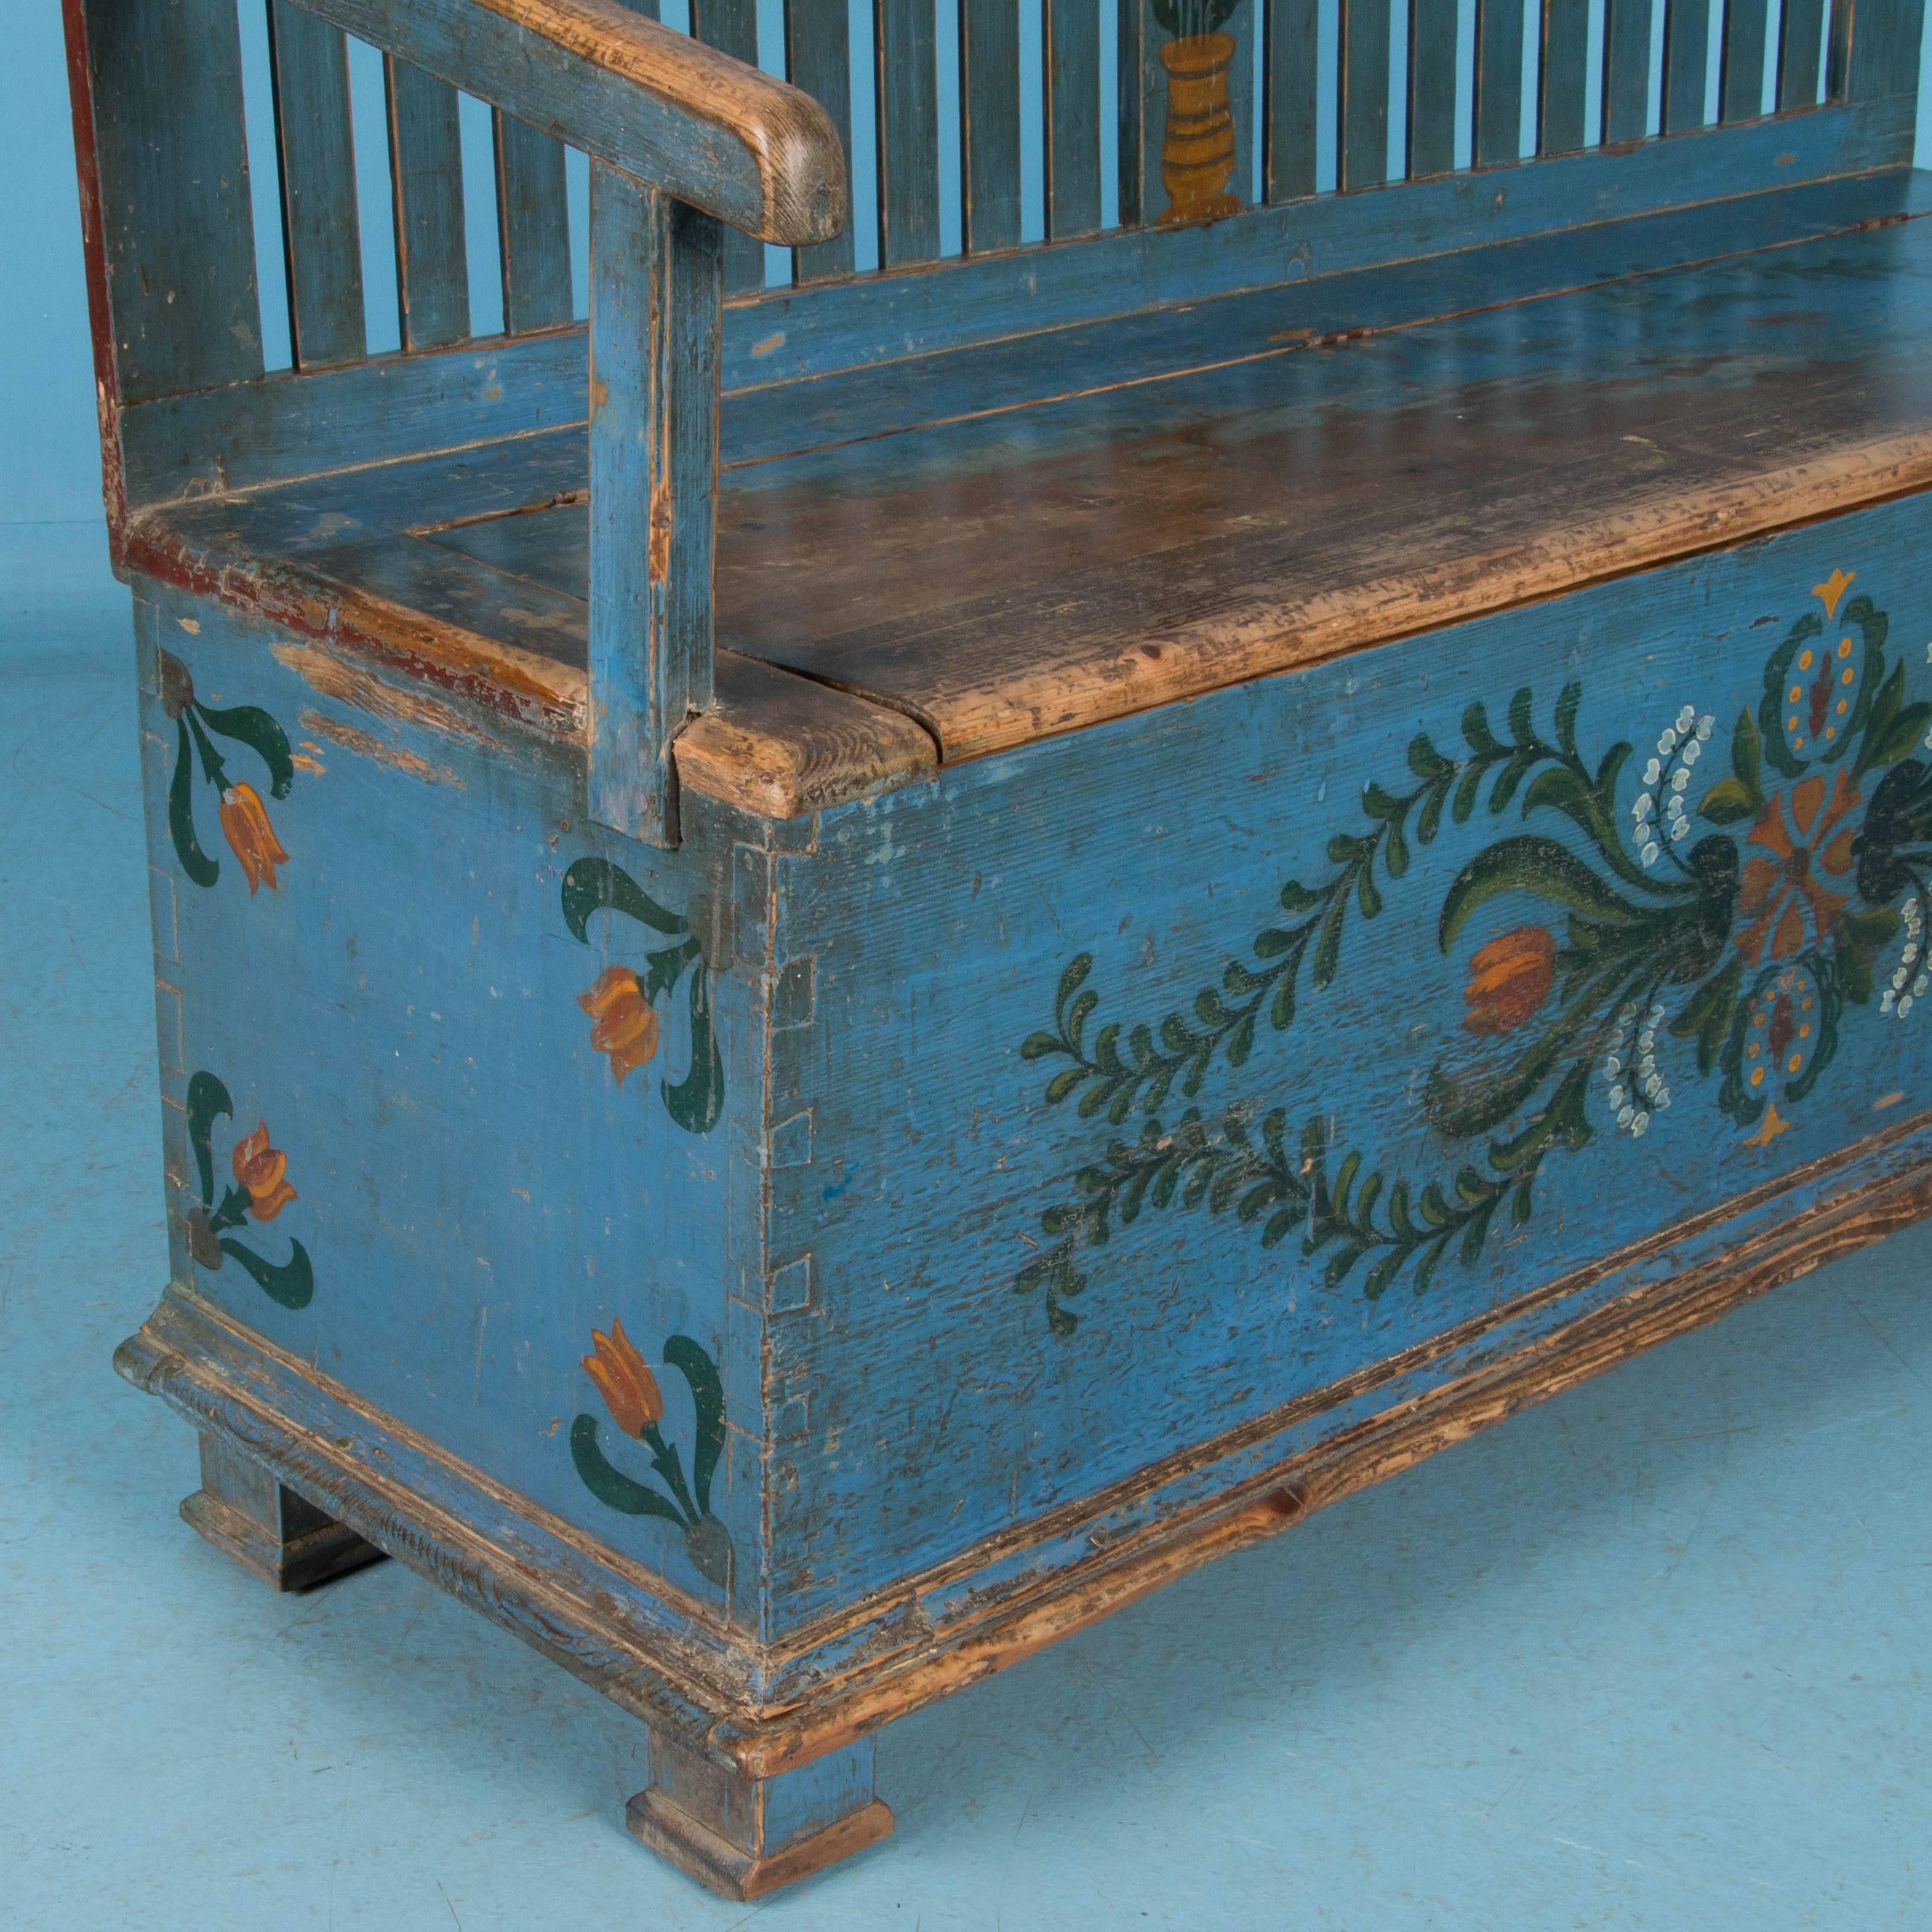 Small Country Folk Art Blue Painted Storage Bench 1